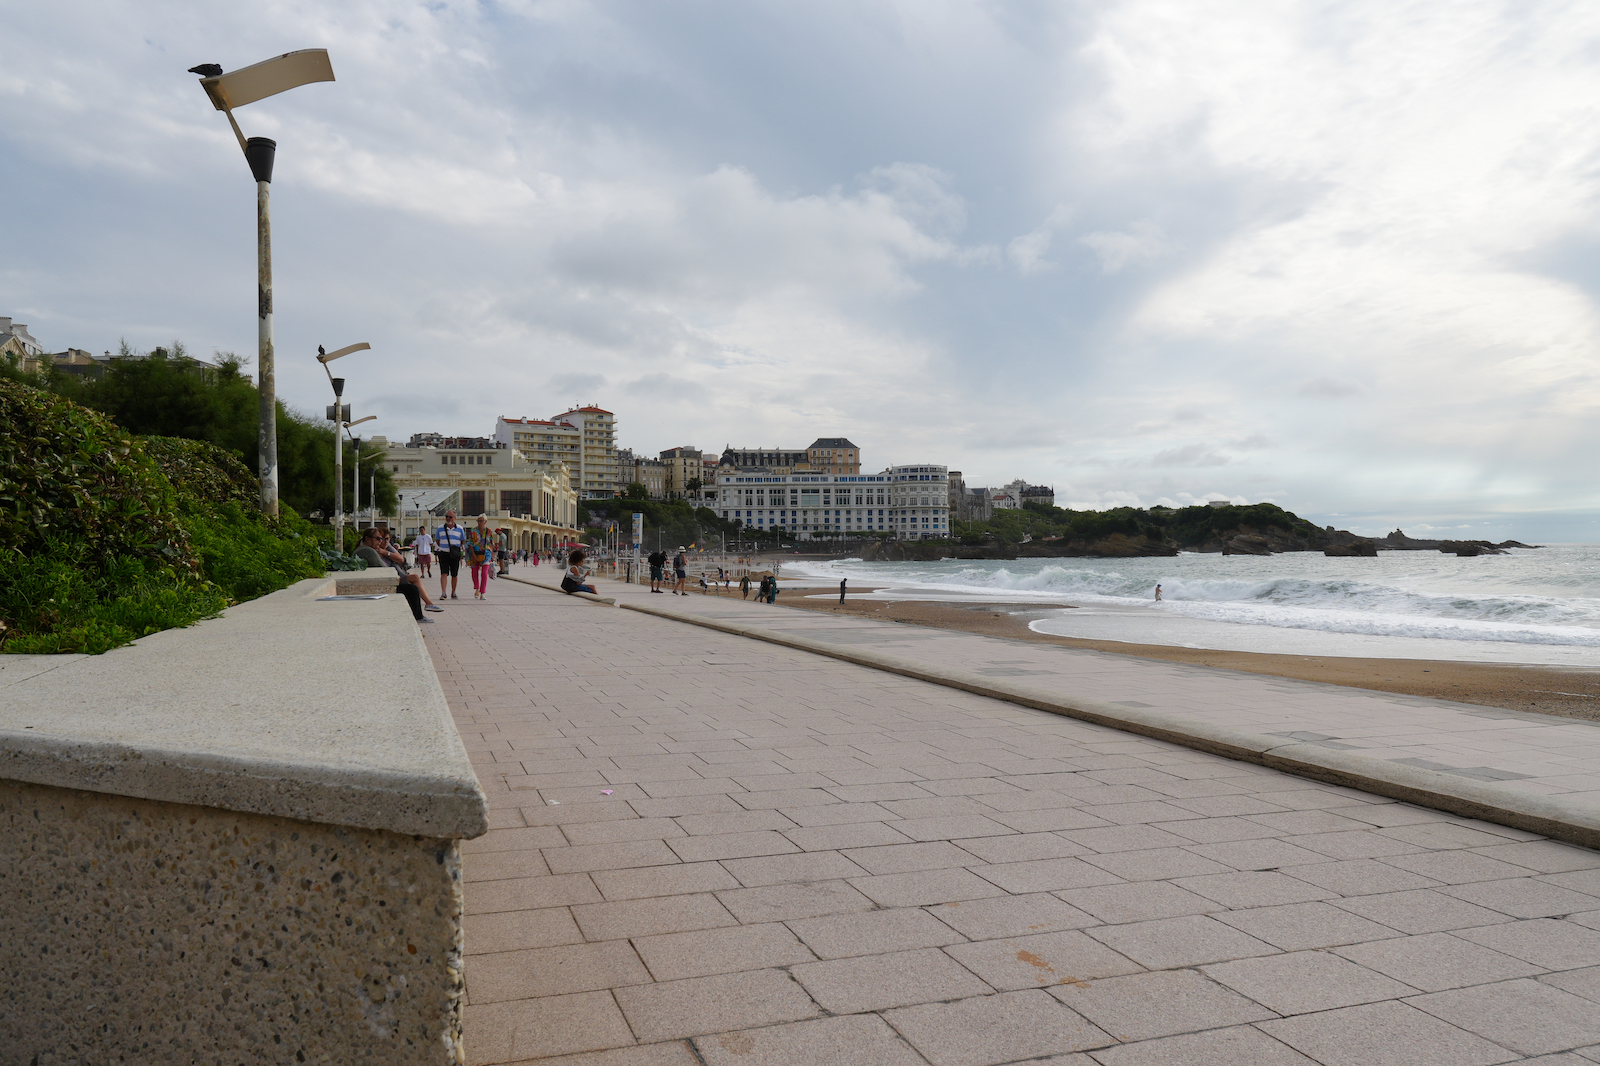 Sample image shot using the Sony Alpha A6700 of Biarritz beach